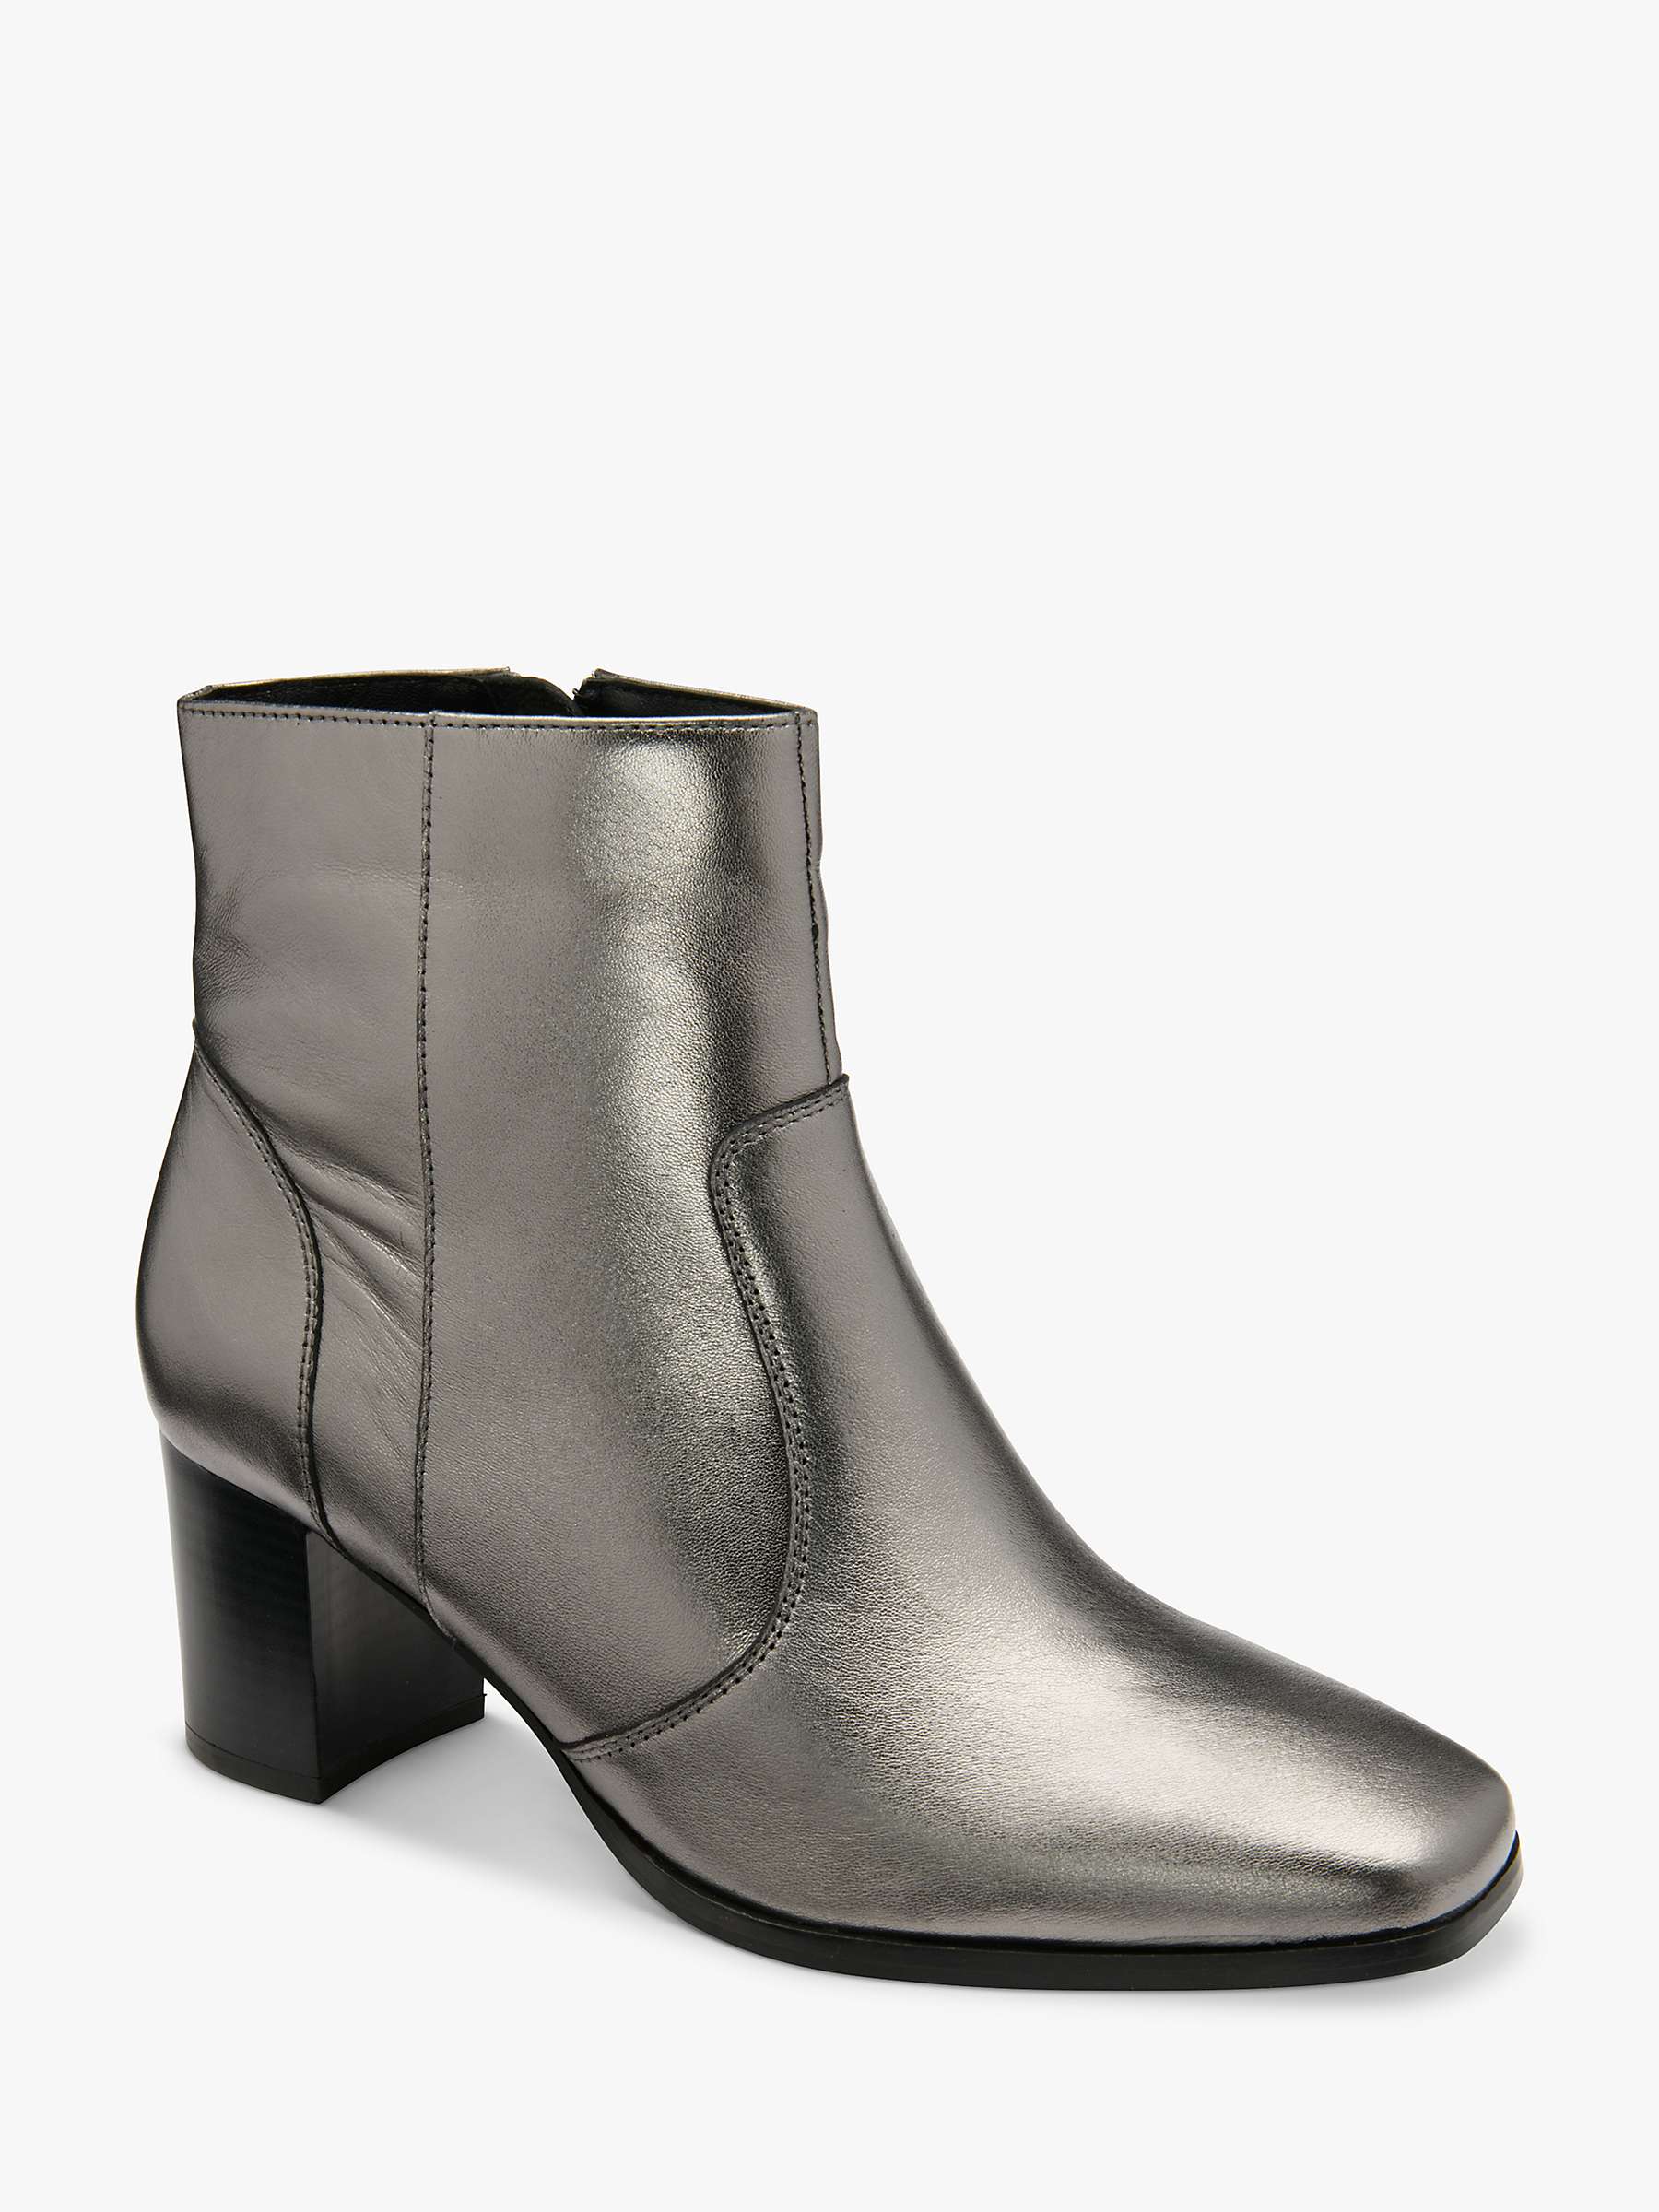 Chanel Grey Leather Black Point Chain Booties